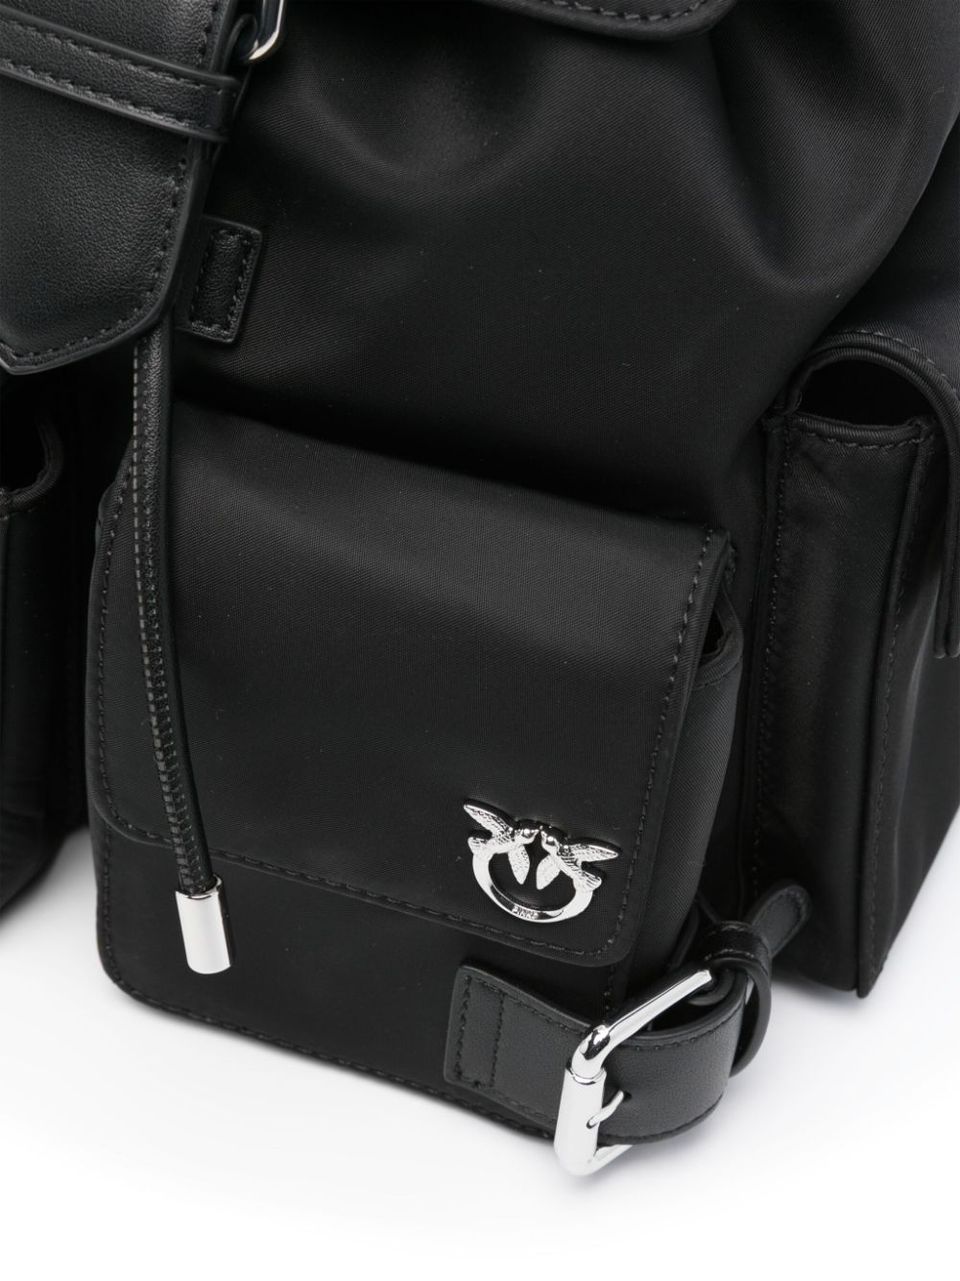 Women's 'Pocket' backpack with pockets and logo